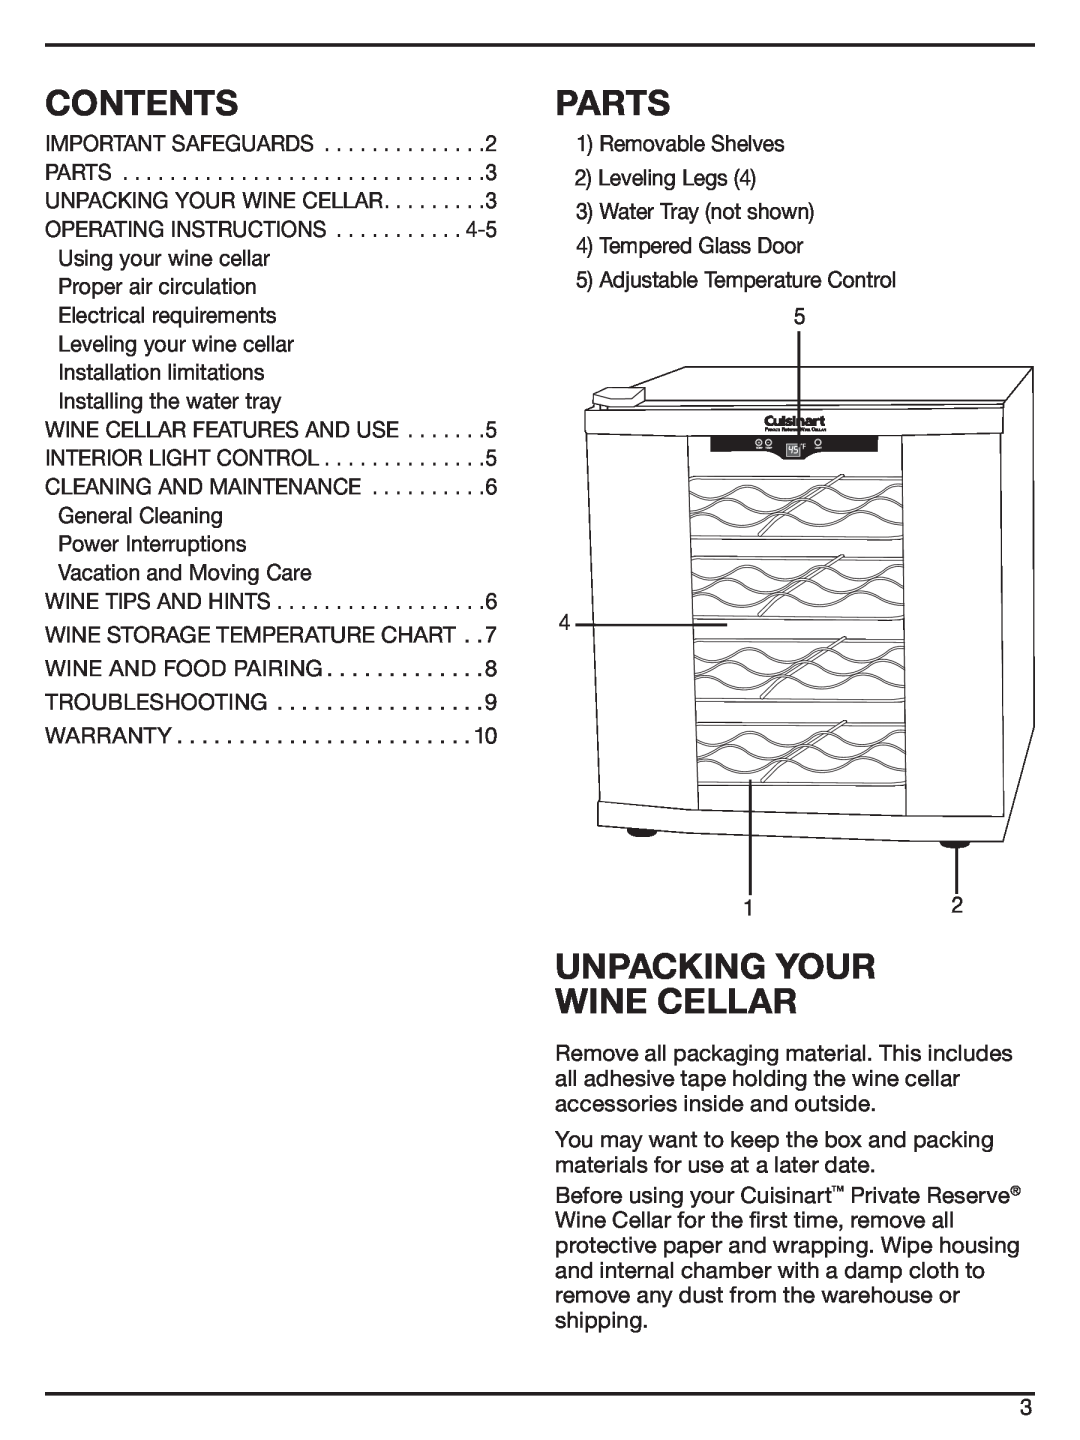 Cuisinart CWC-1600 manual Contents, Parts, Unpacking Your Wine Cellar 